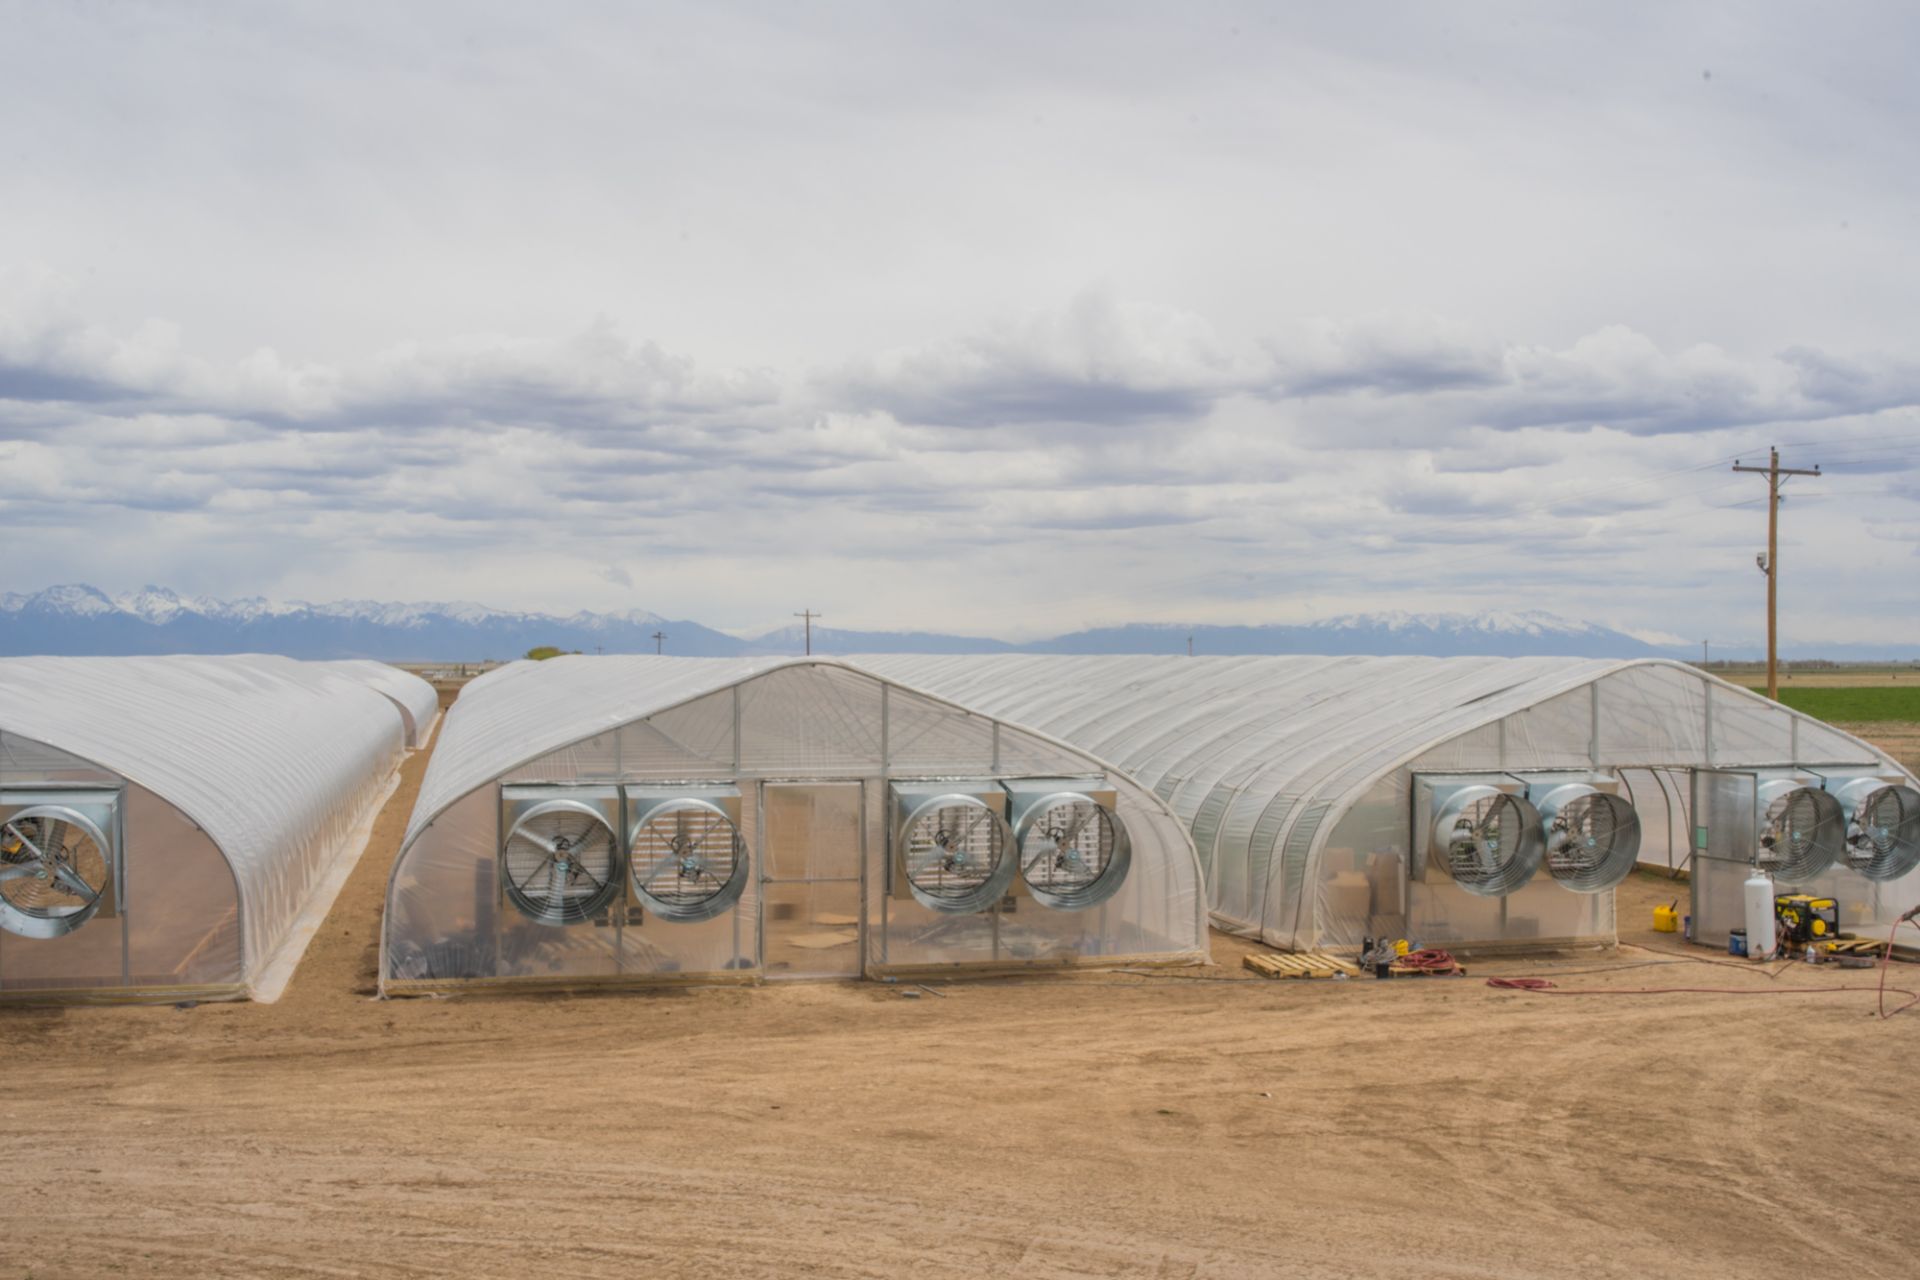 Scenic Acres Greenhouse Mfg Greenhouse w/ Four Exhaust Fans and Two Heaters, 34' x 200' gothic hoop